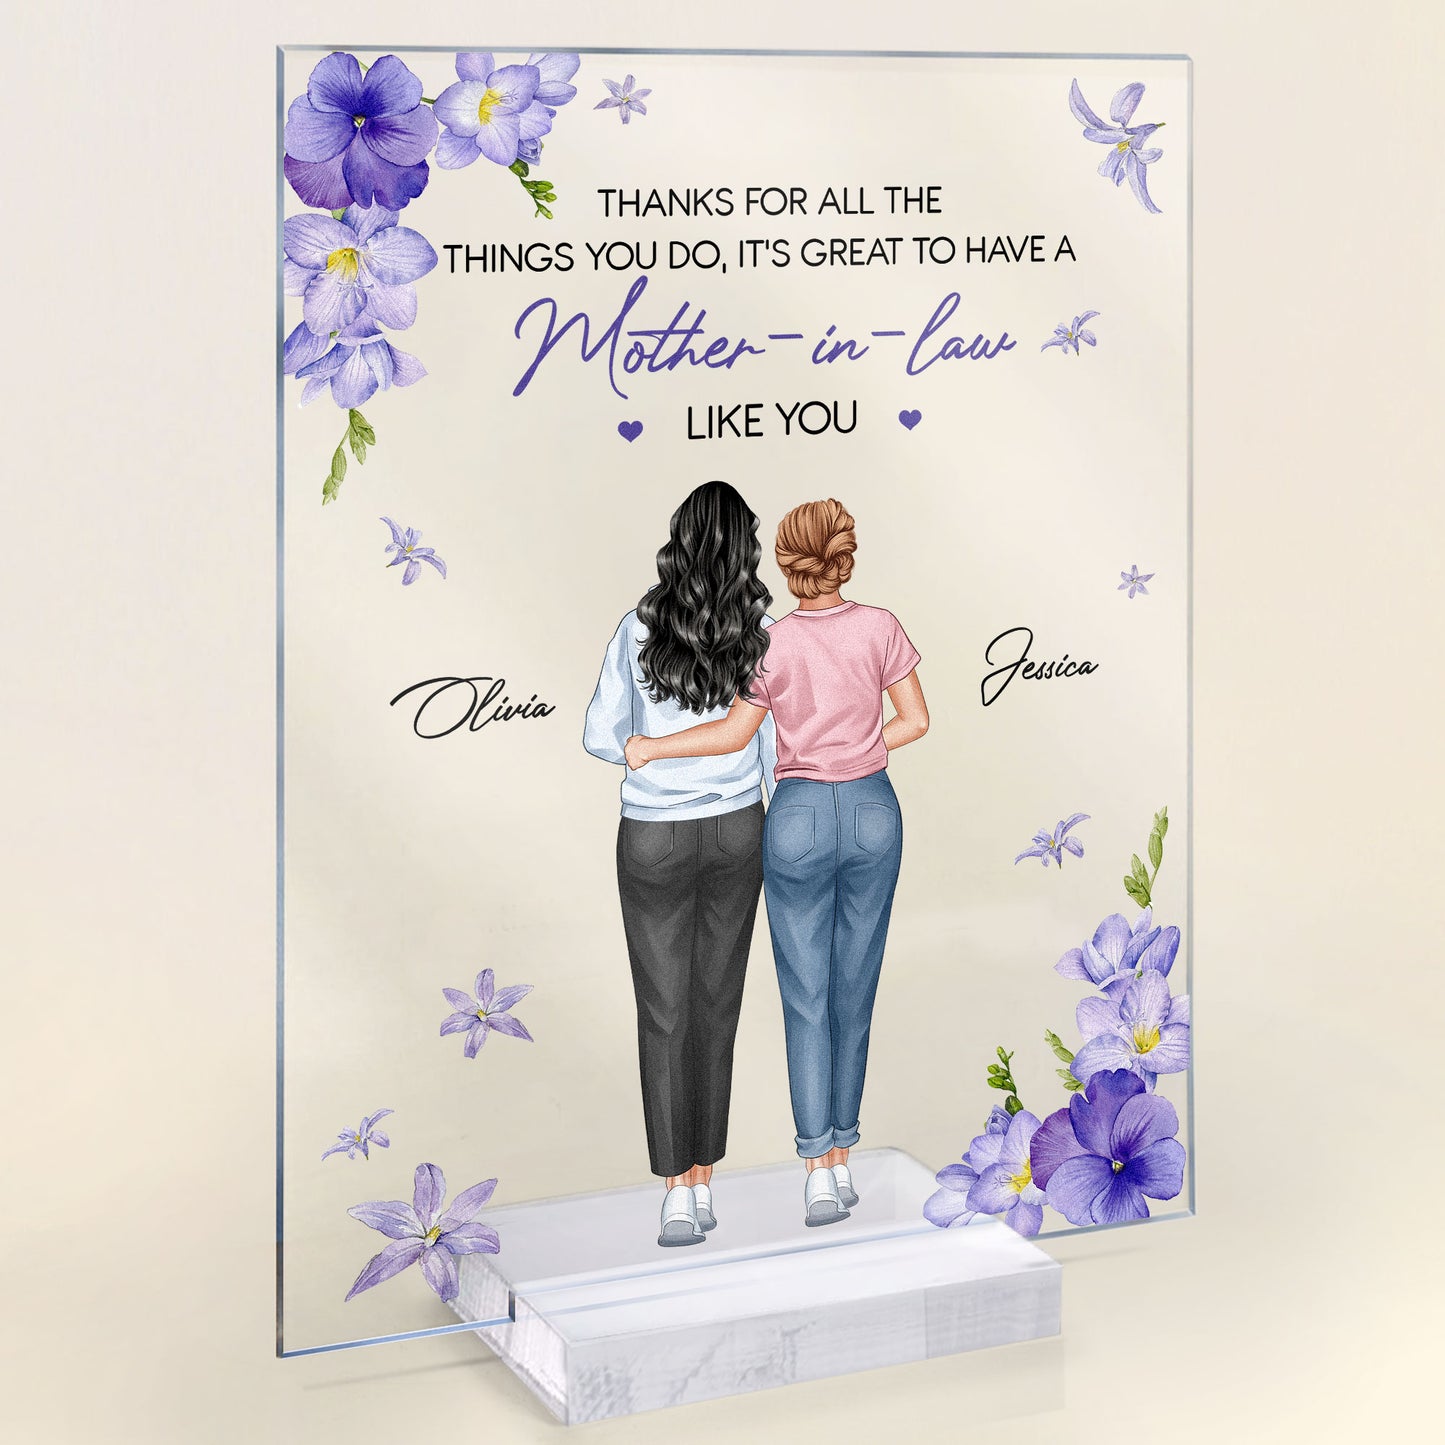 It's Great To Have A Mother-In-Law Like You - Personalized Acrylic Plaque